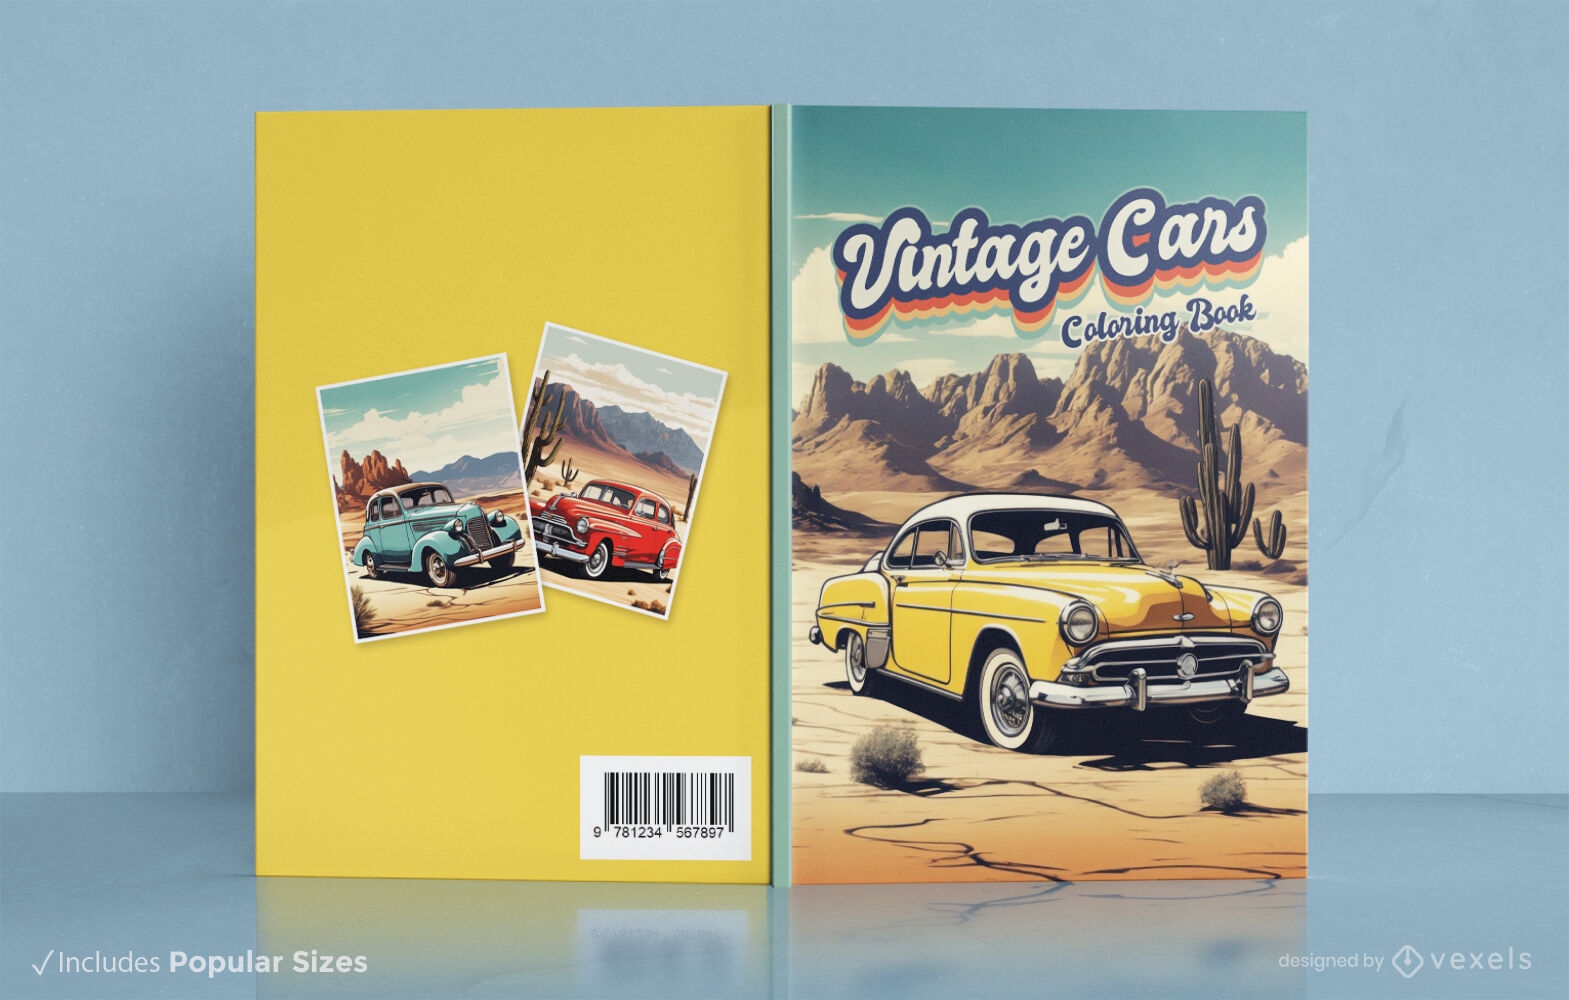 Vintage cars coloring book cover design